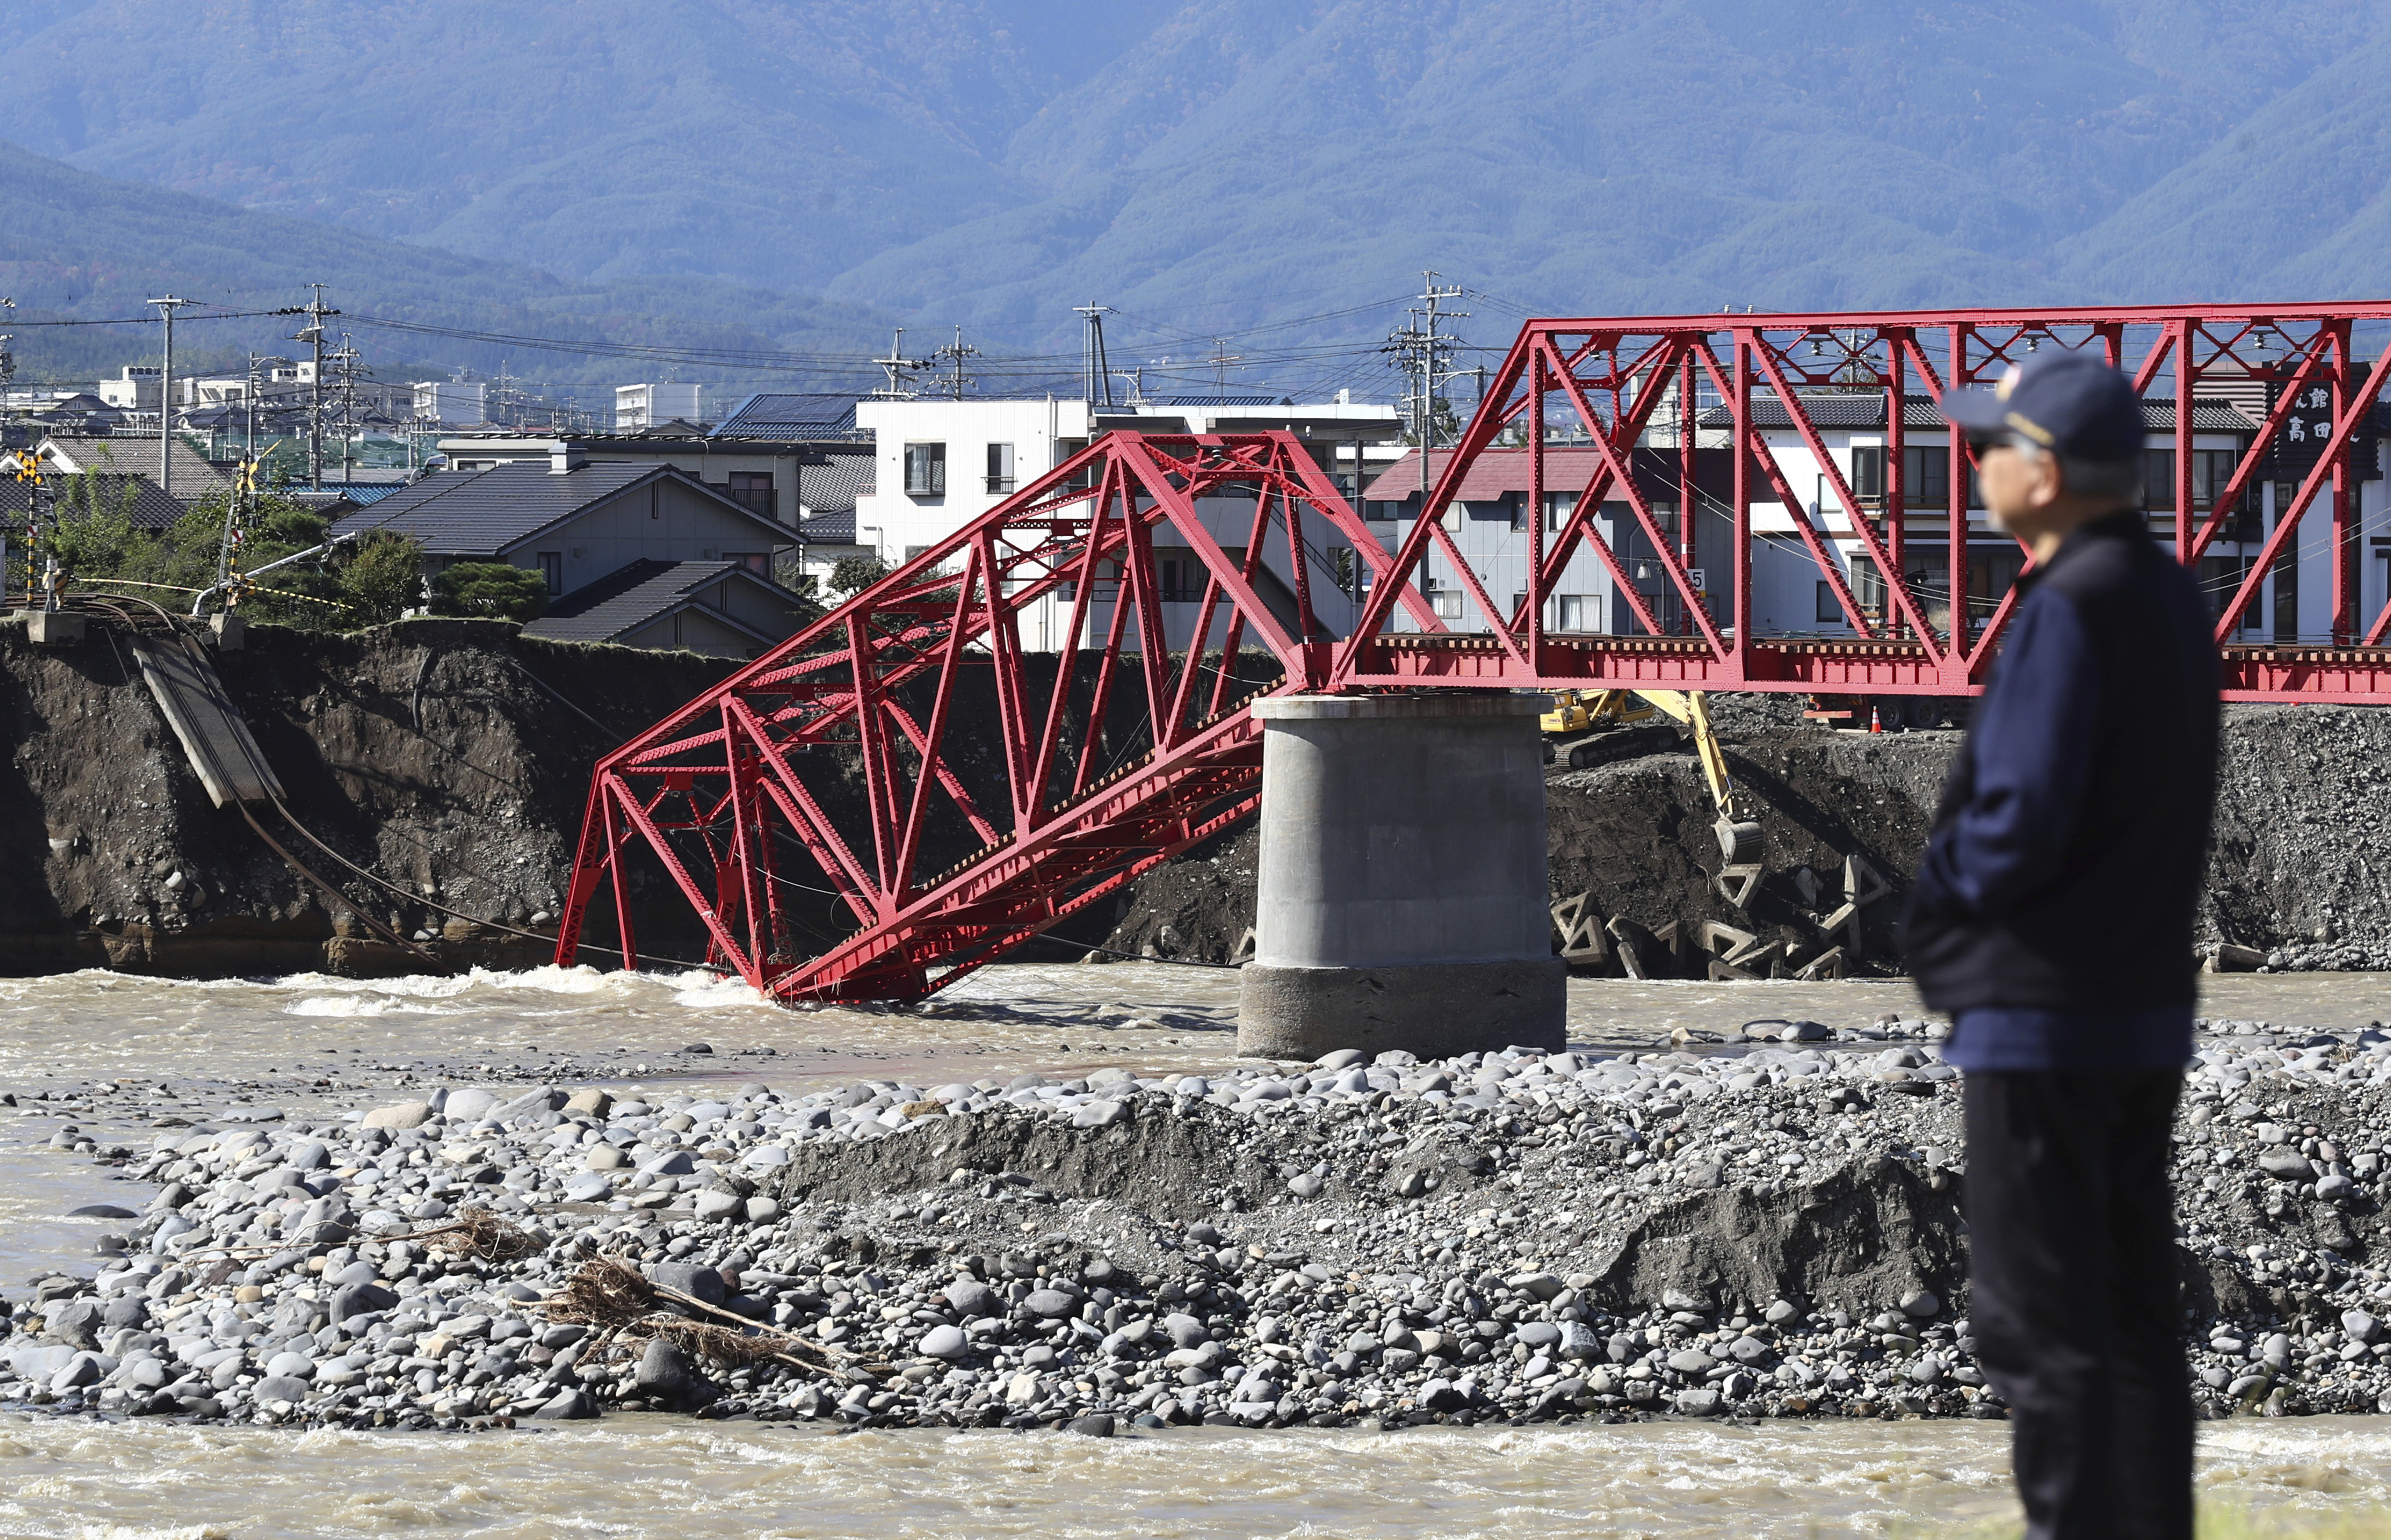 A bridge of Ueda Electric Railway Bessho Line damaged by the flooding of Chikuma River triggered by the typhoon Hagibis is pictured in Ueda, Nagano prefecture on Oct. 23, 2019. The powerful Typhoon Hagibis landed on Japan on Oc. 12, bringing about a record rainfall, overflow of rivers and landslides. 82 people have been confirmed dead. ( The Yomiuri Shimbun via AP Images )